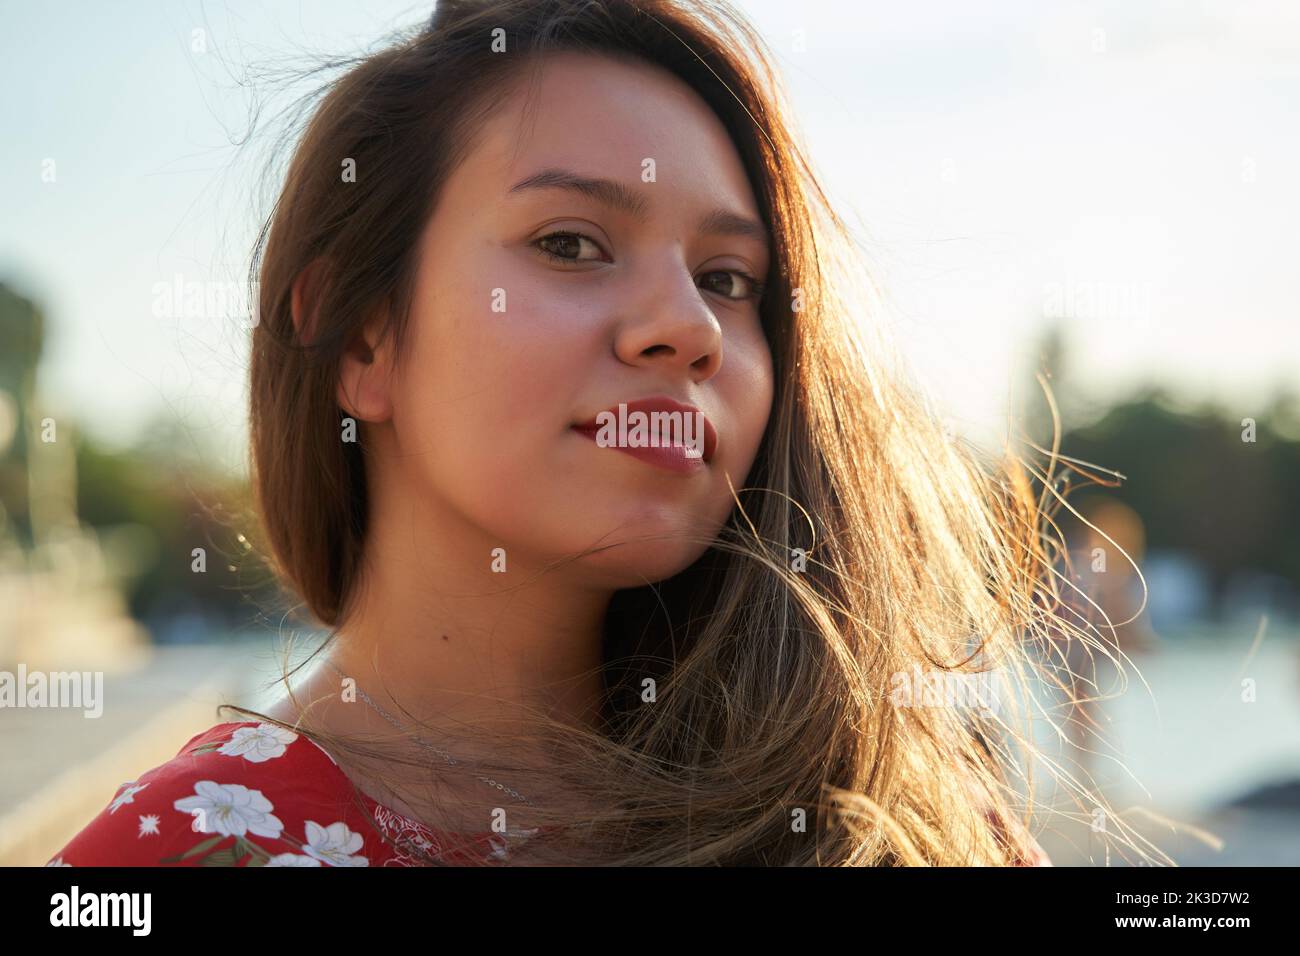 close-up portrait of a young latina with long hair and red lips Stock Photo